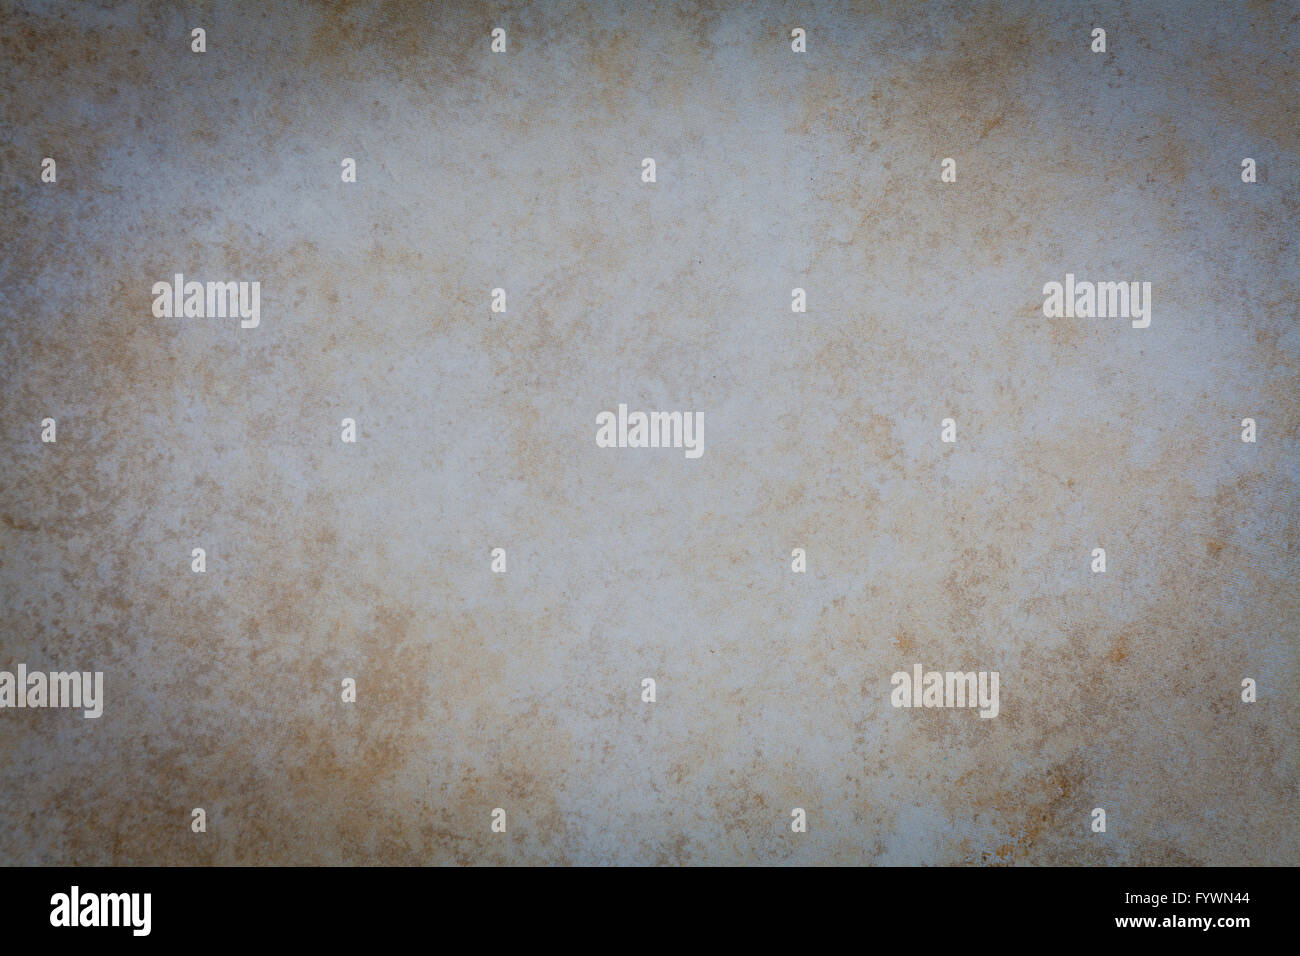 Rustic abstract grungy brownish background Stock Photo